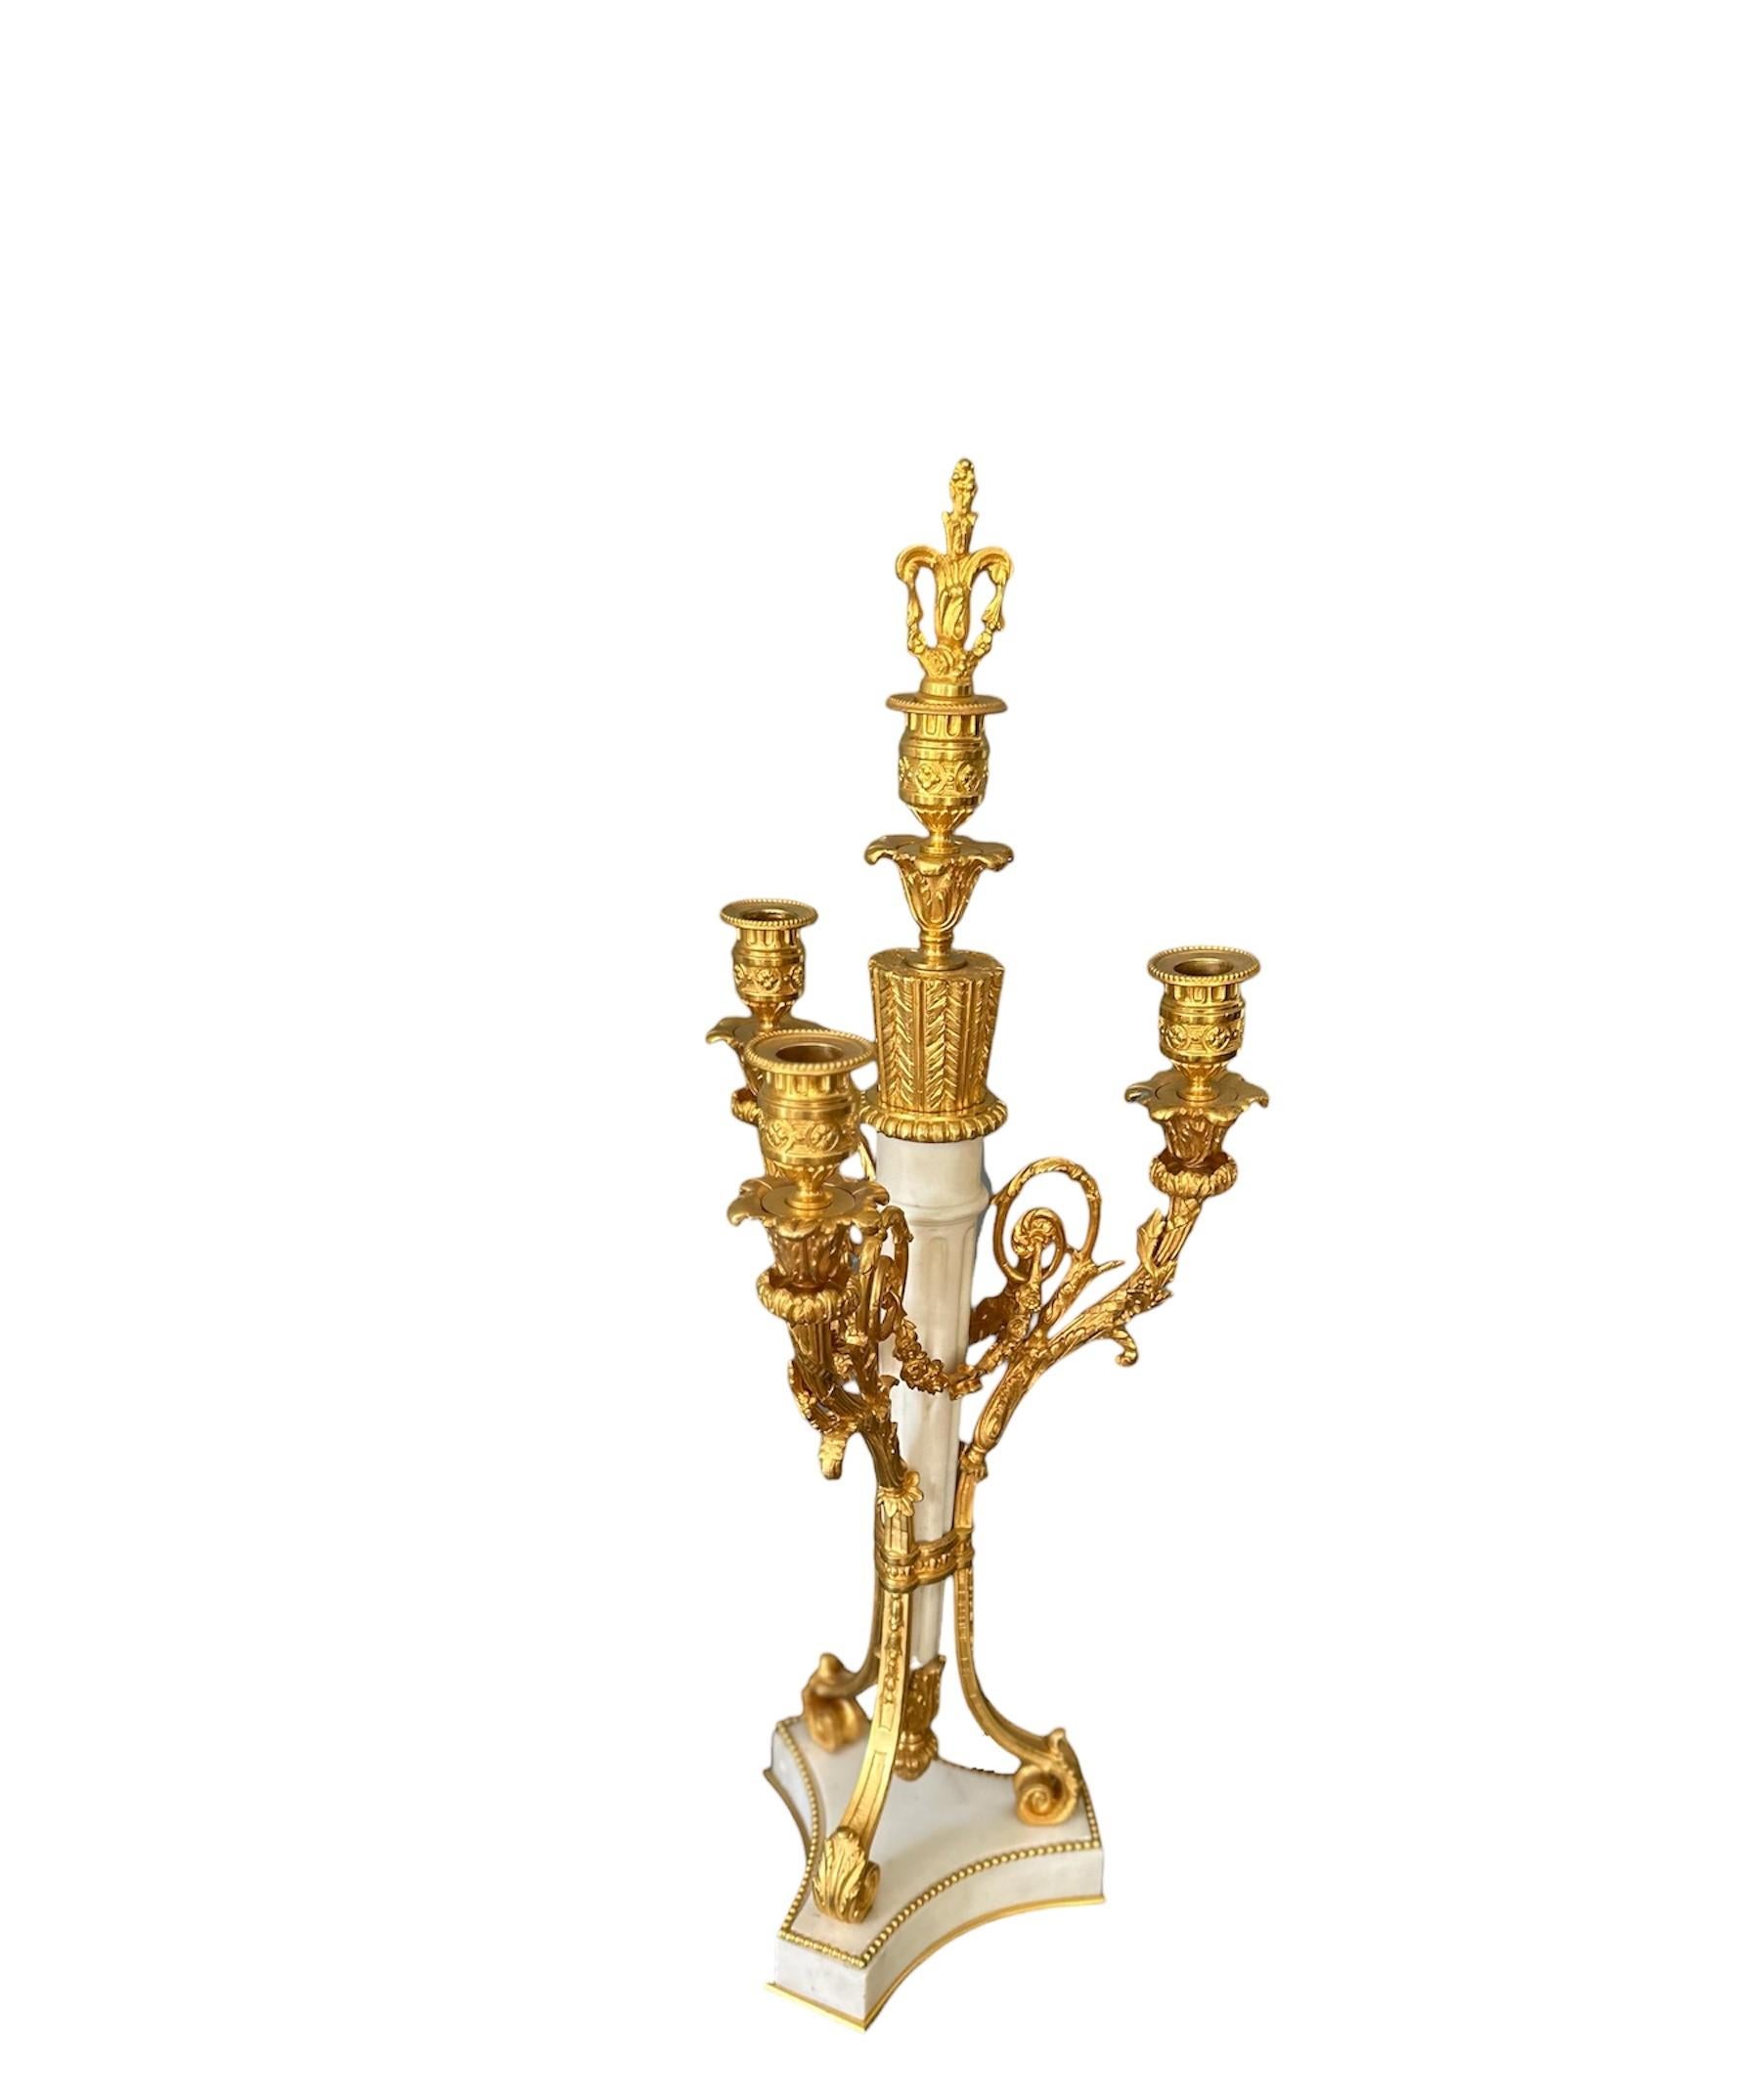 19th Century 19th century, Napoleon III, Copy of Gilt Bronze and Marble Candelabra For Sale